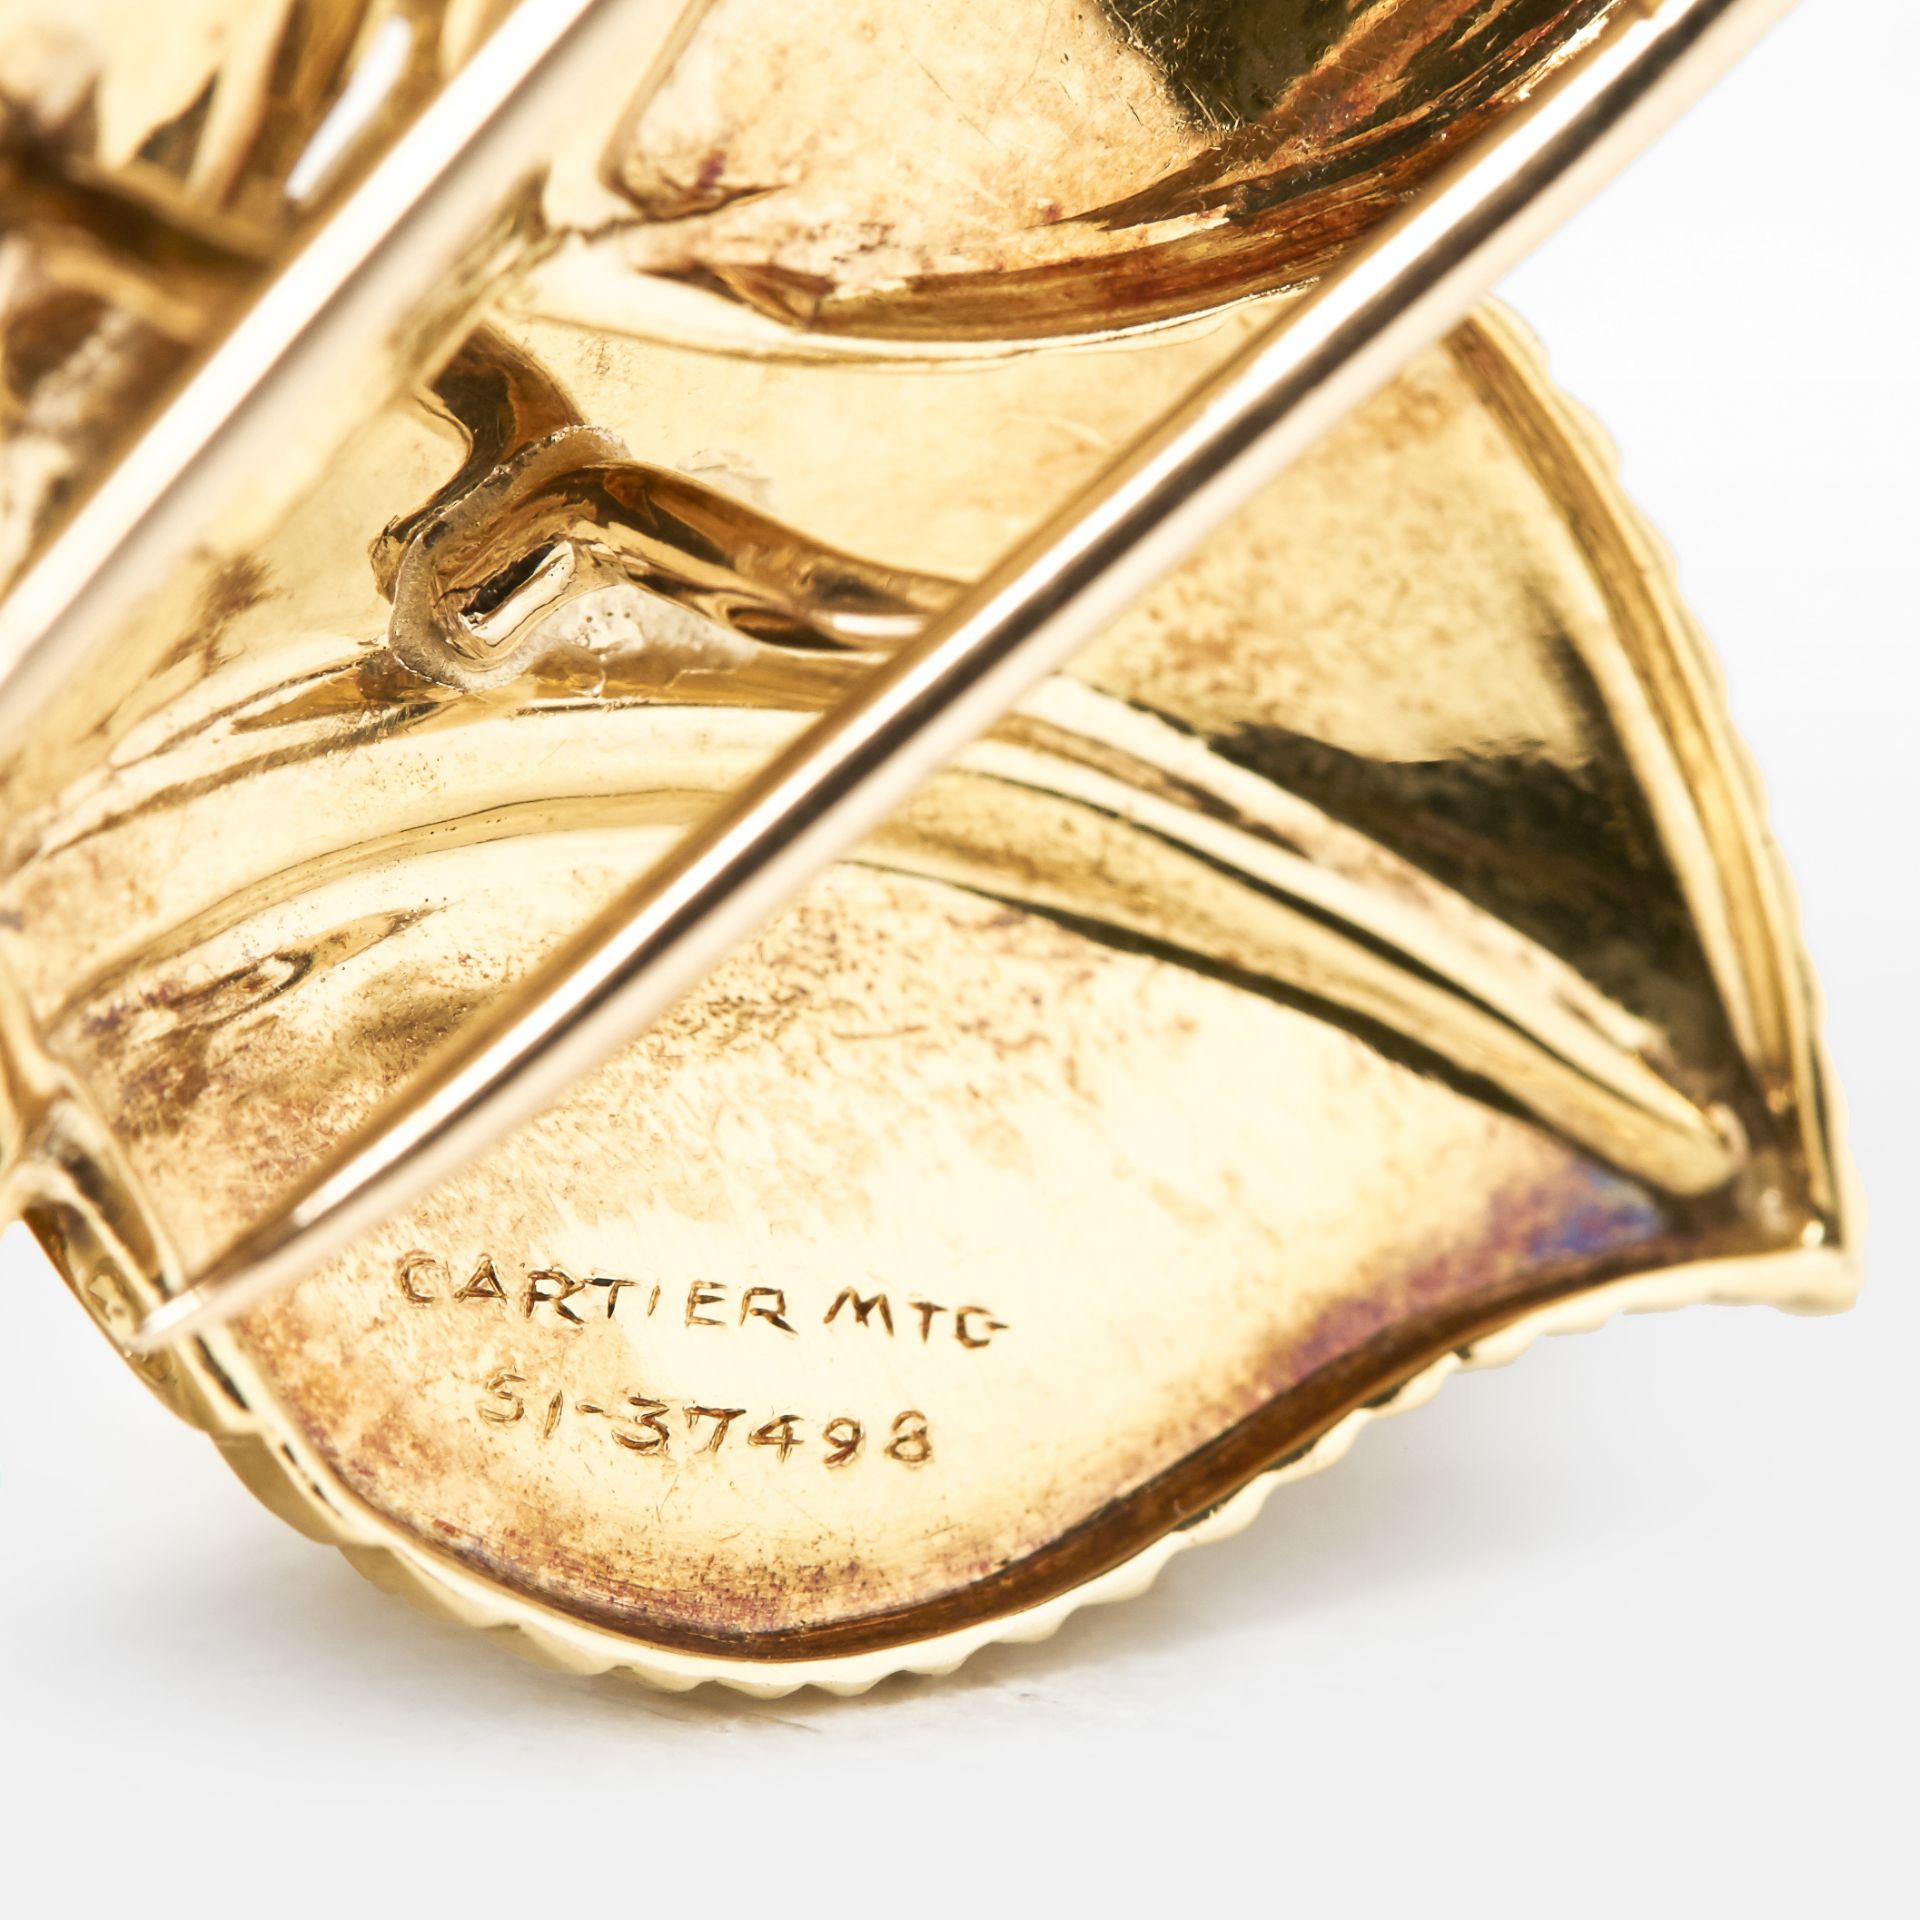 Cartier 18k Yellow Gold Diamond Vintage Leaf Brooch with Presentation Box - Image 11 of 16